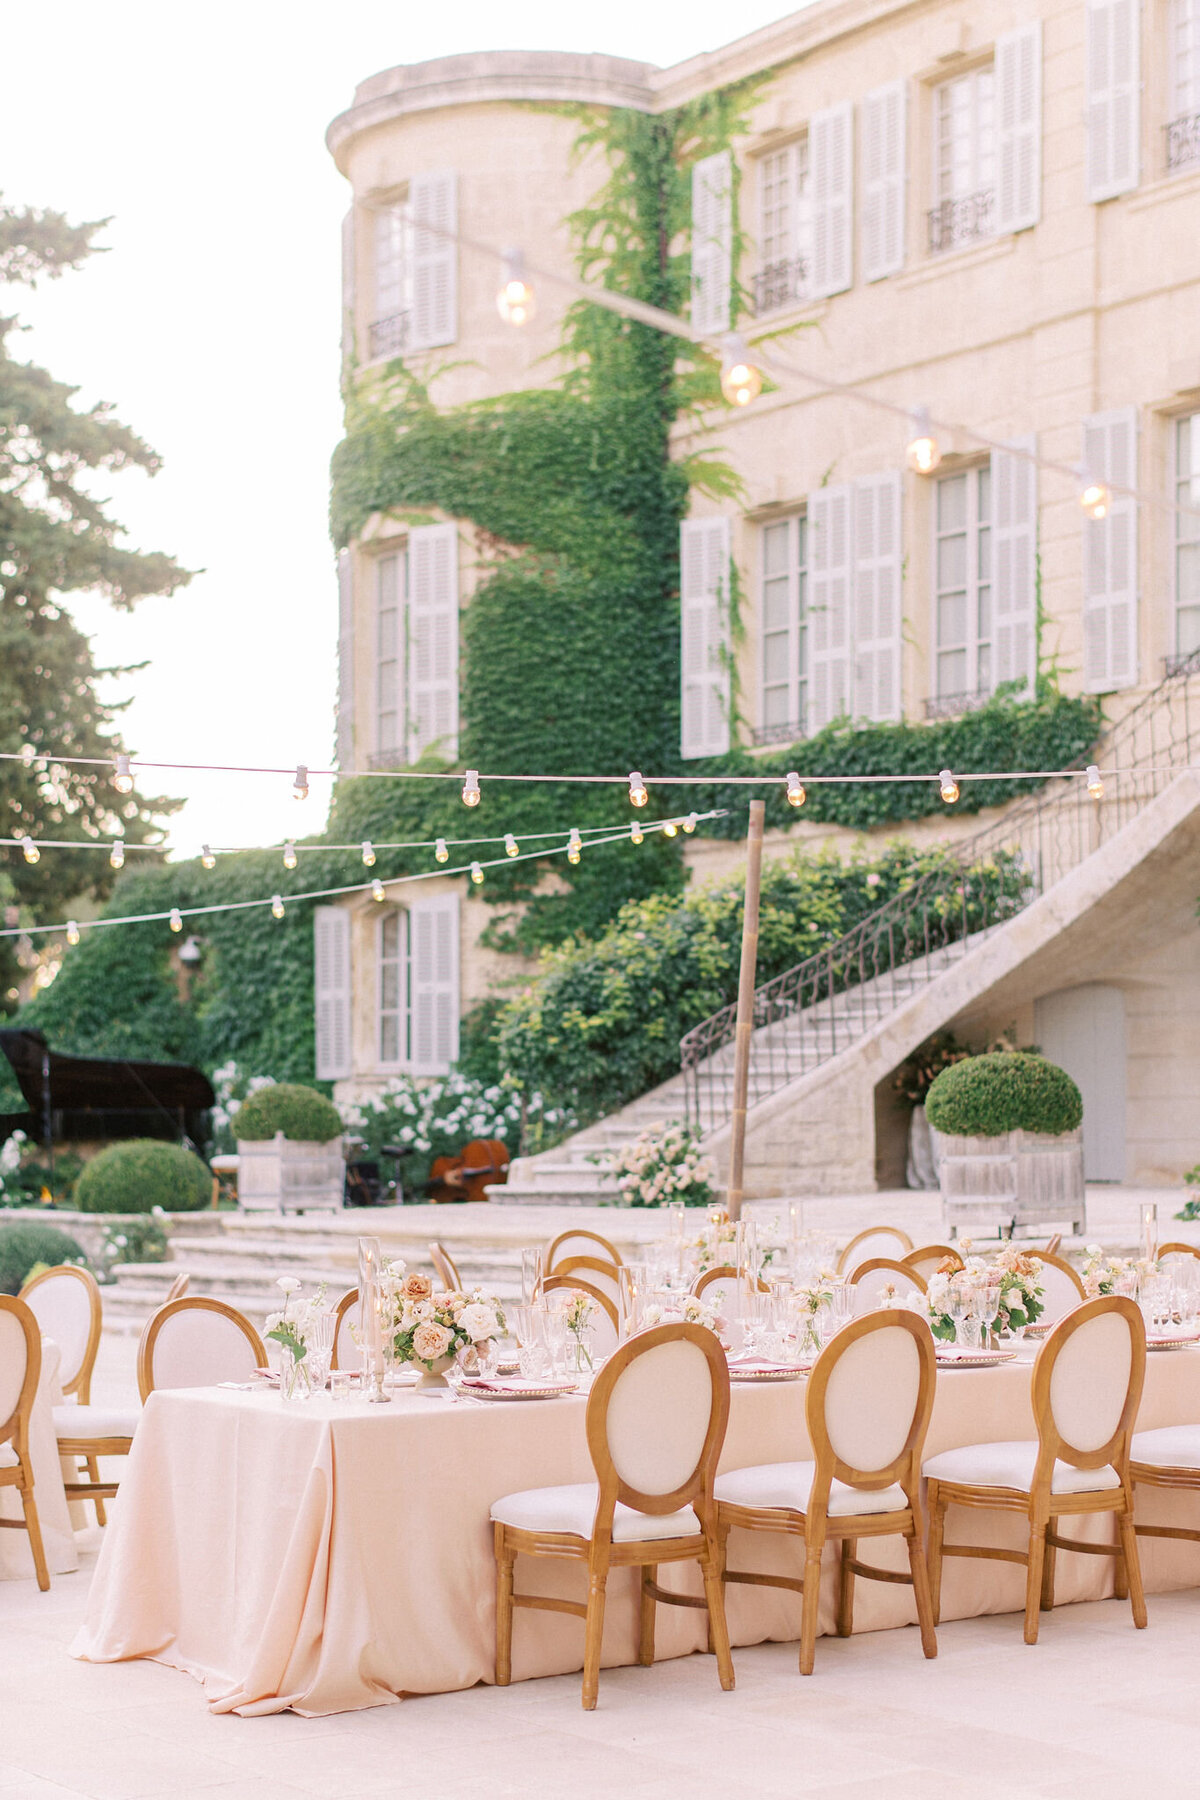 Jennifer Fox Weddings English speaking wedding planning & design agency in France crafting refined and bespoke weddings and celebrations Provence, Paris and destination MailysFortunePhotography_Jordan&Brian_22preview